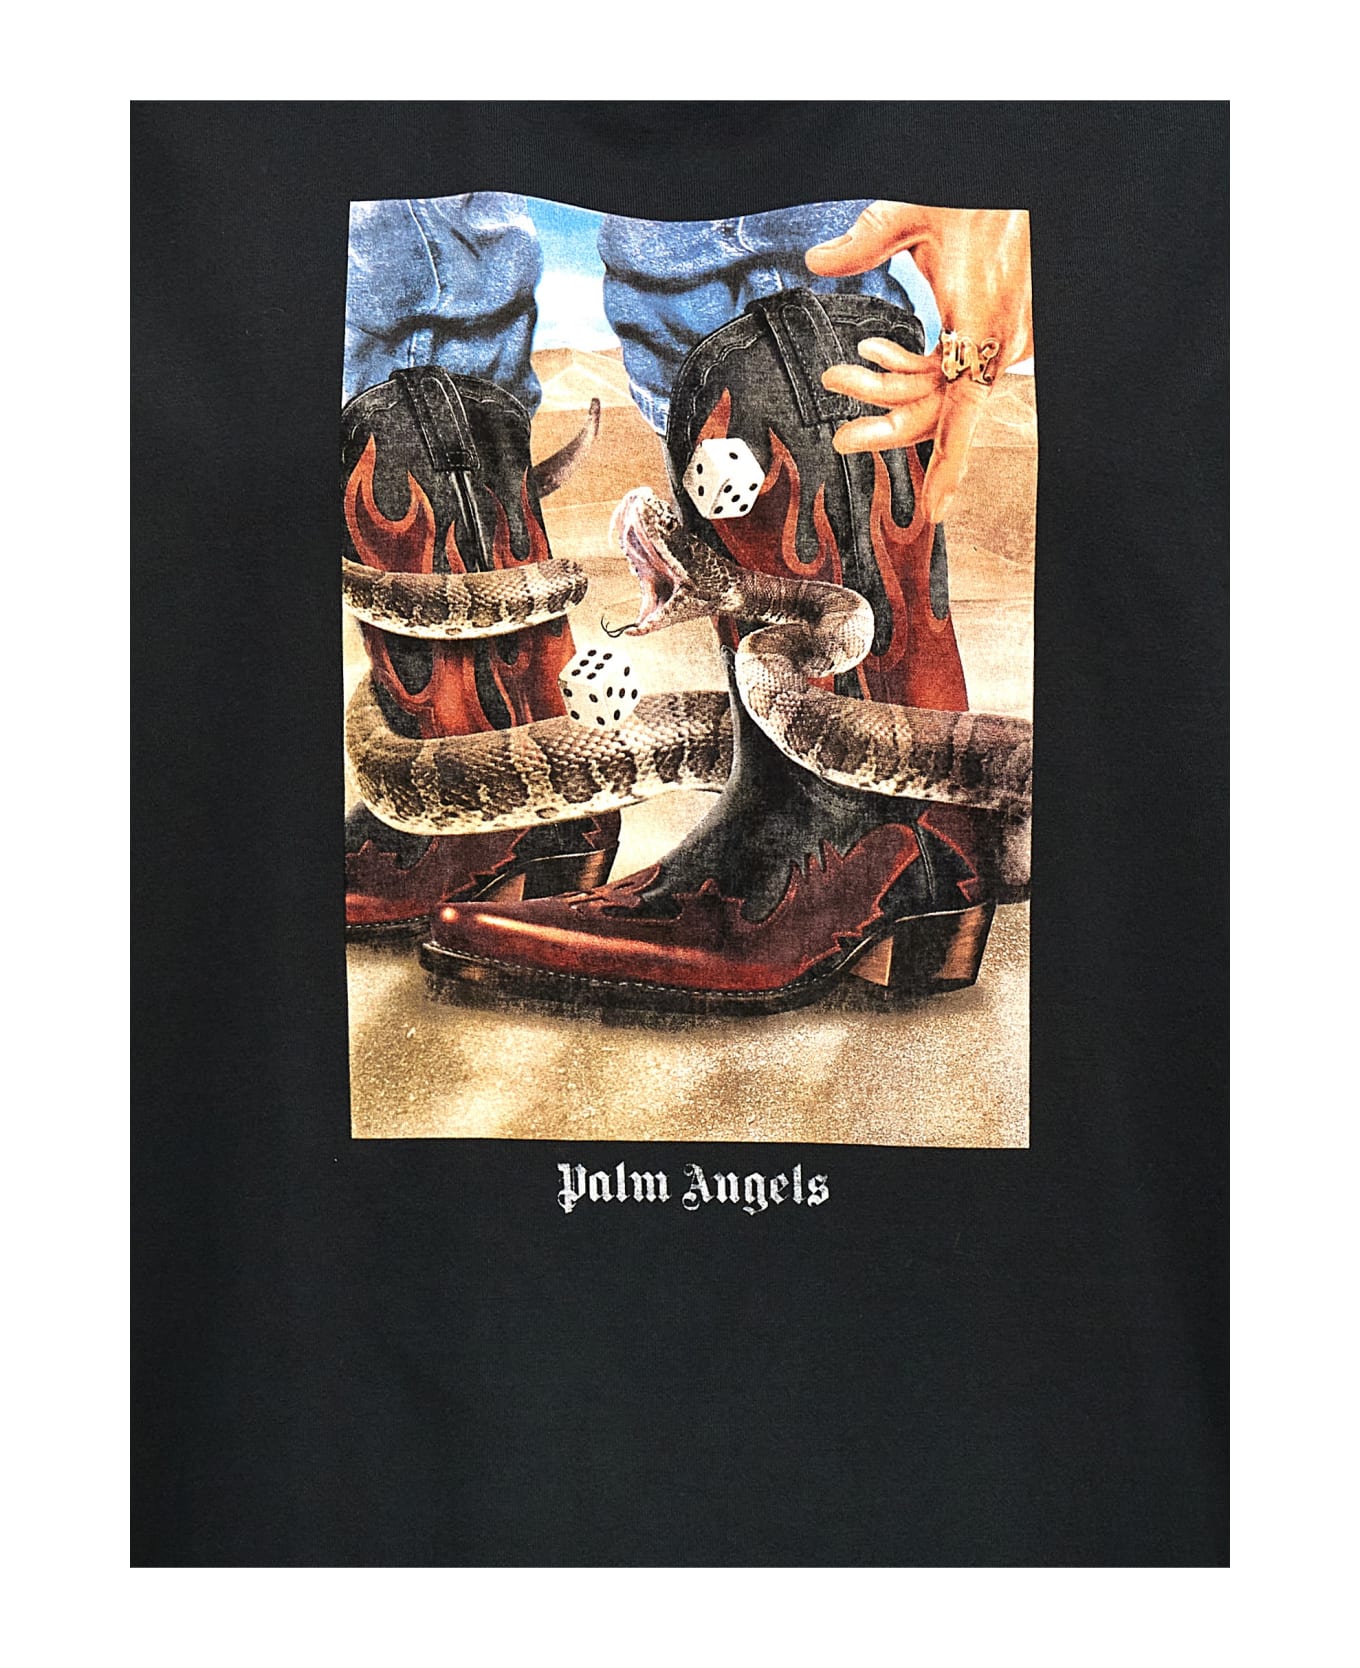 Palm Angels Dice Game T-shirt - BLACK Tシャツ